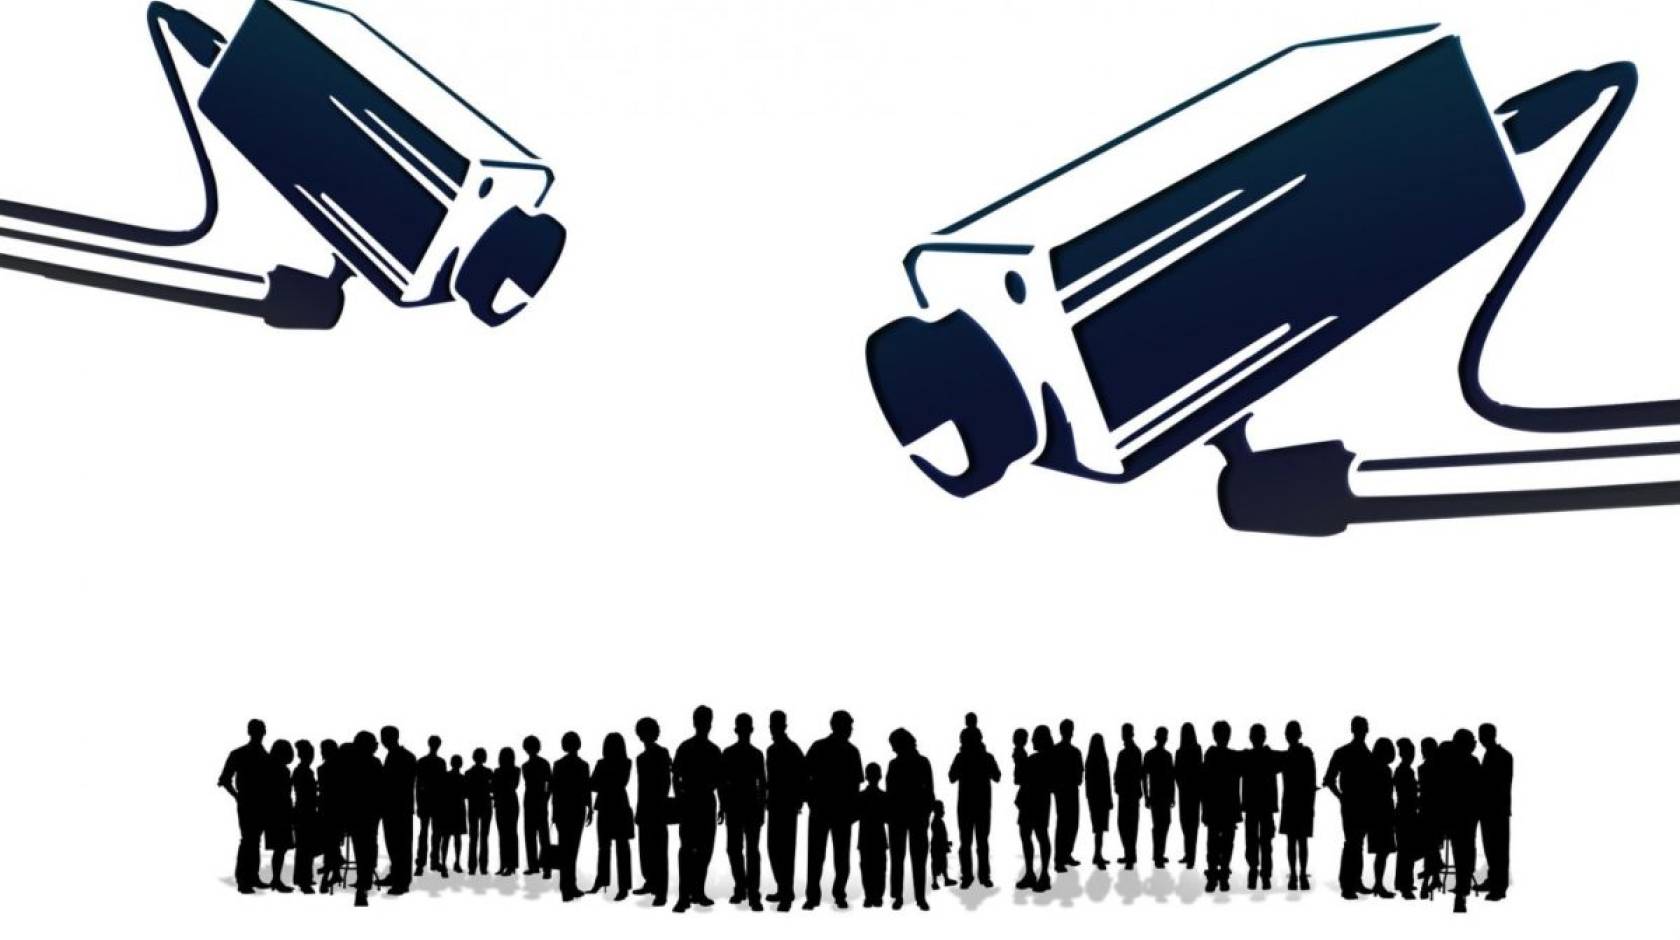 Illustration of two security cameras over a crowd of people in a line